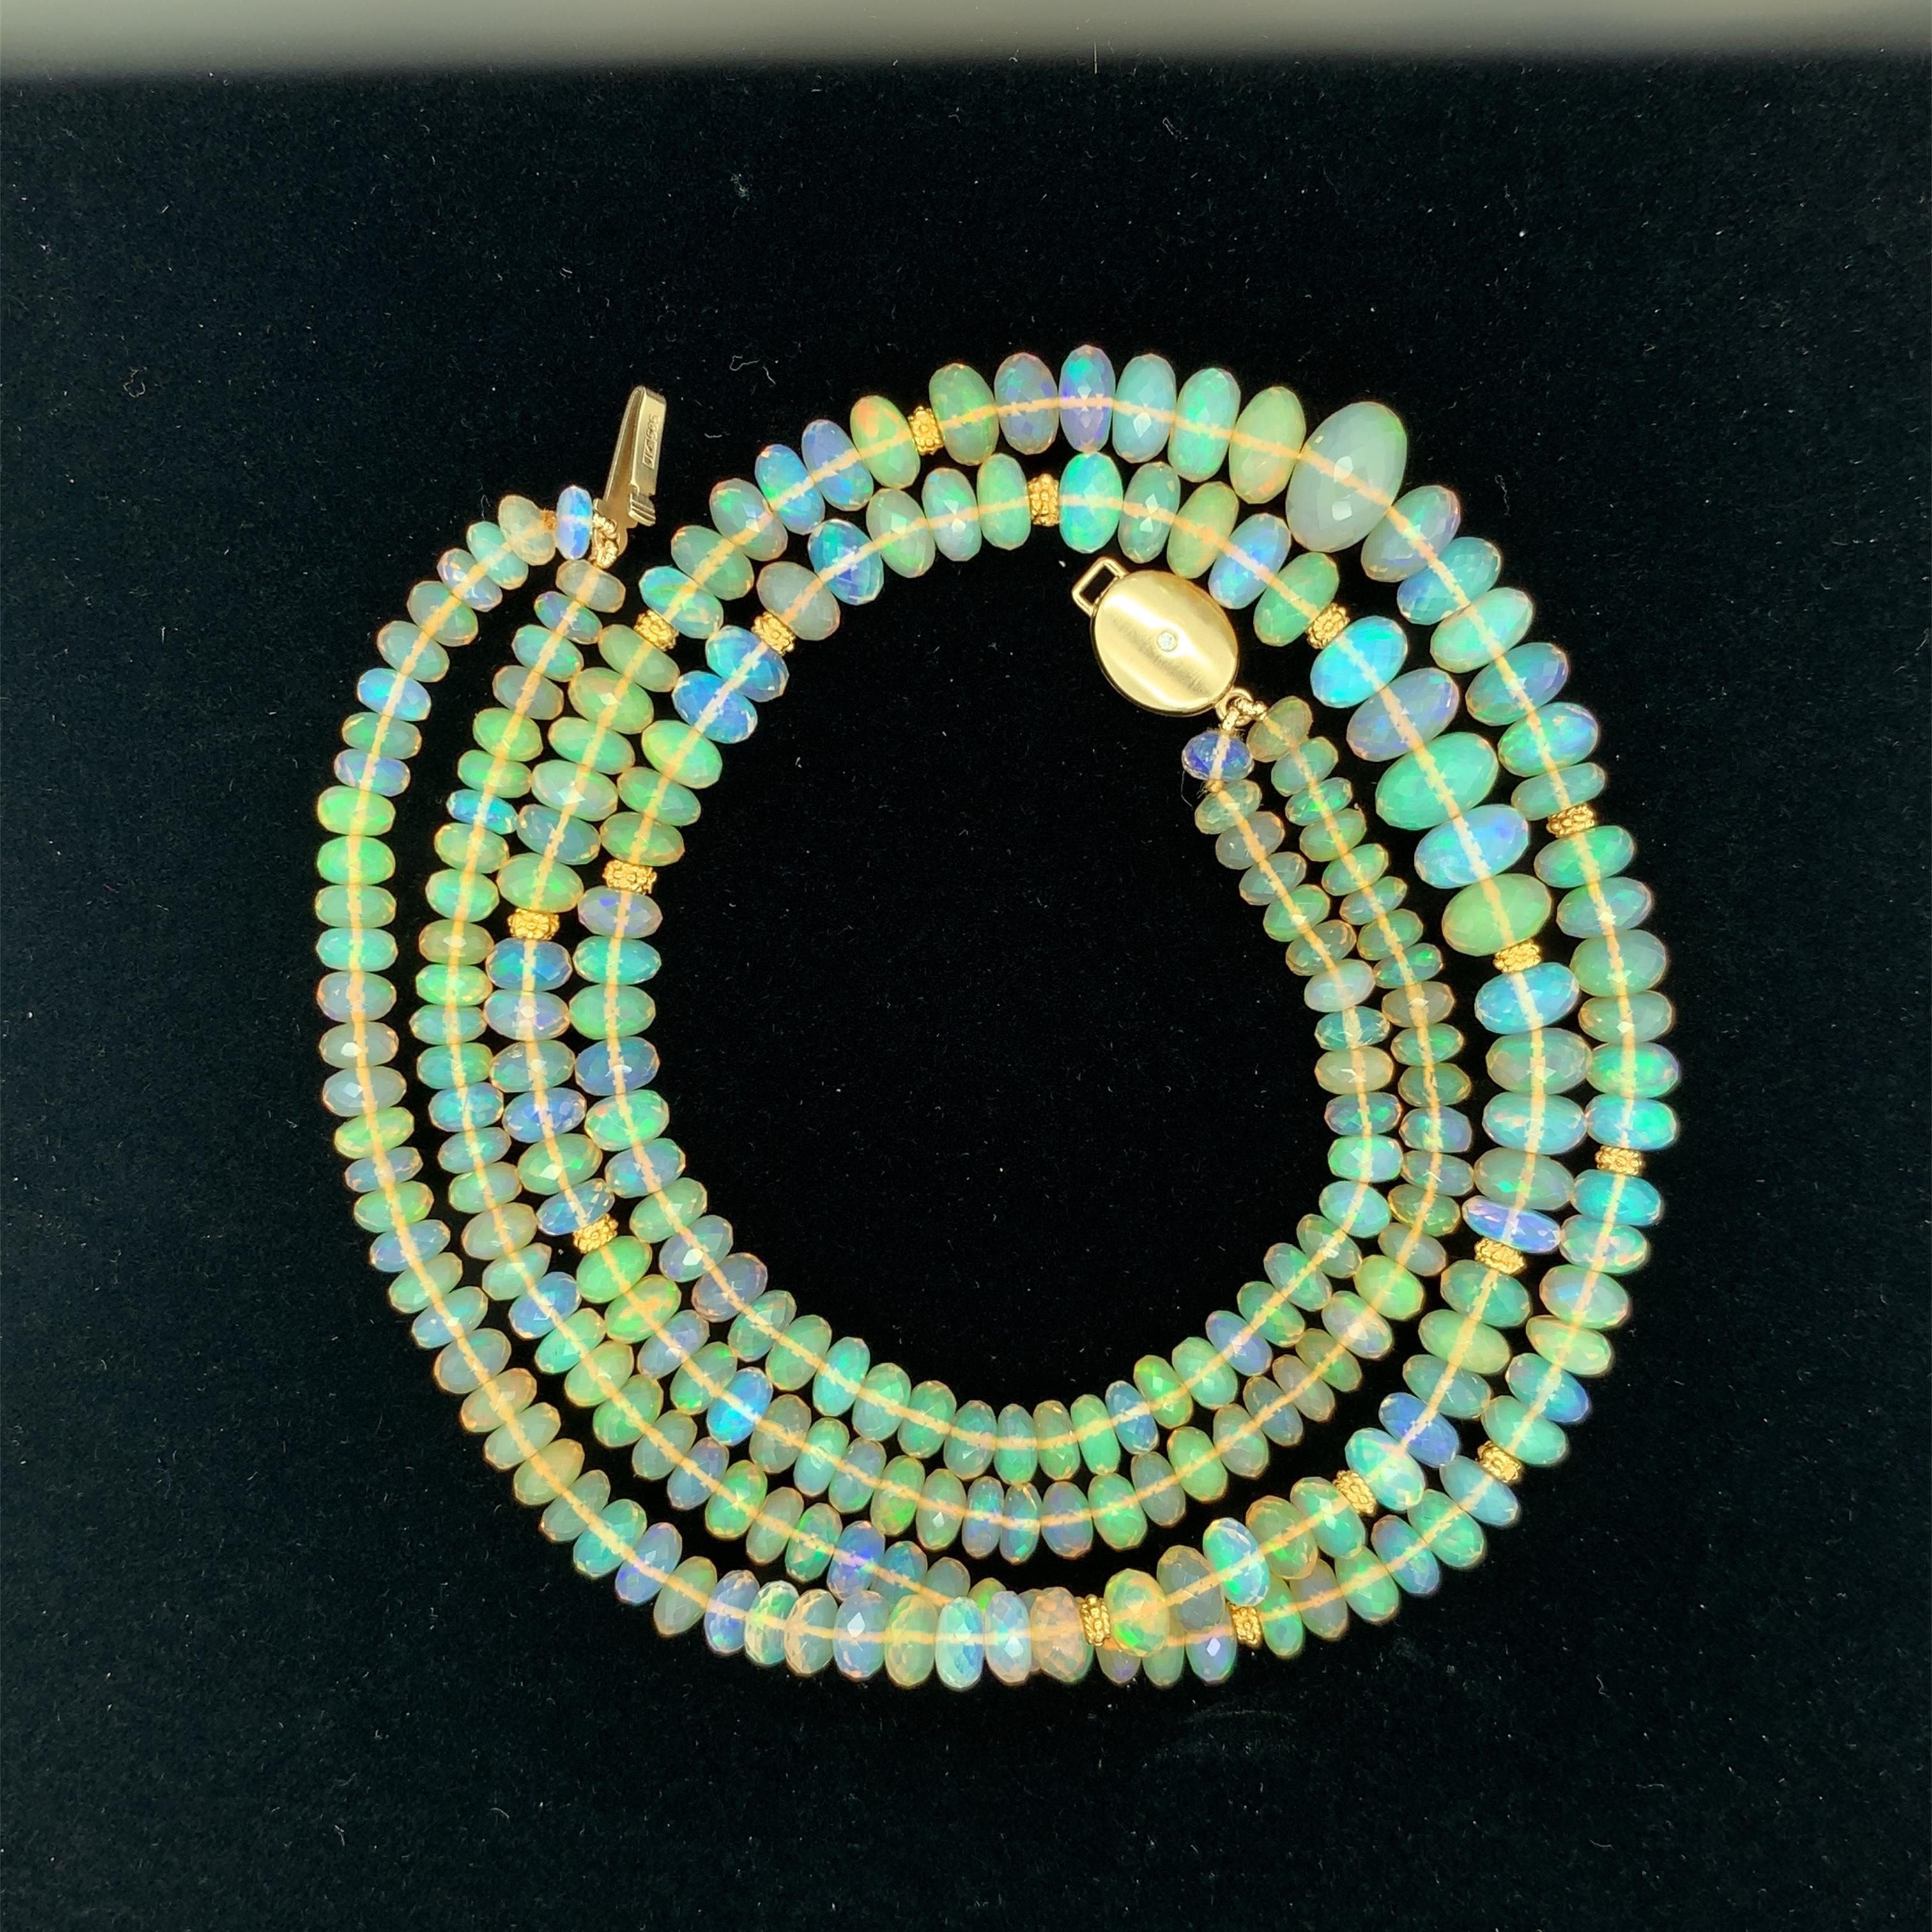 This is an elegant double strand of colorful Ethiopian opal beads weighing 170.45 carats total! The beads are faceted and  graduate in sizes ranging from 11.00mm to 5.00 millimeters. Predominately green, orange, and lavender with flashes of